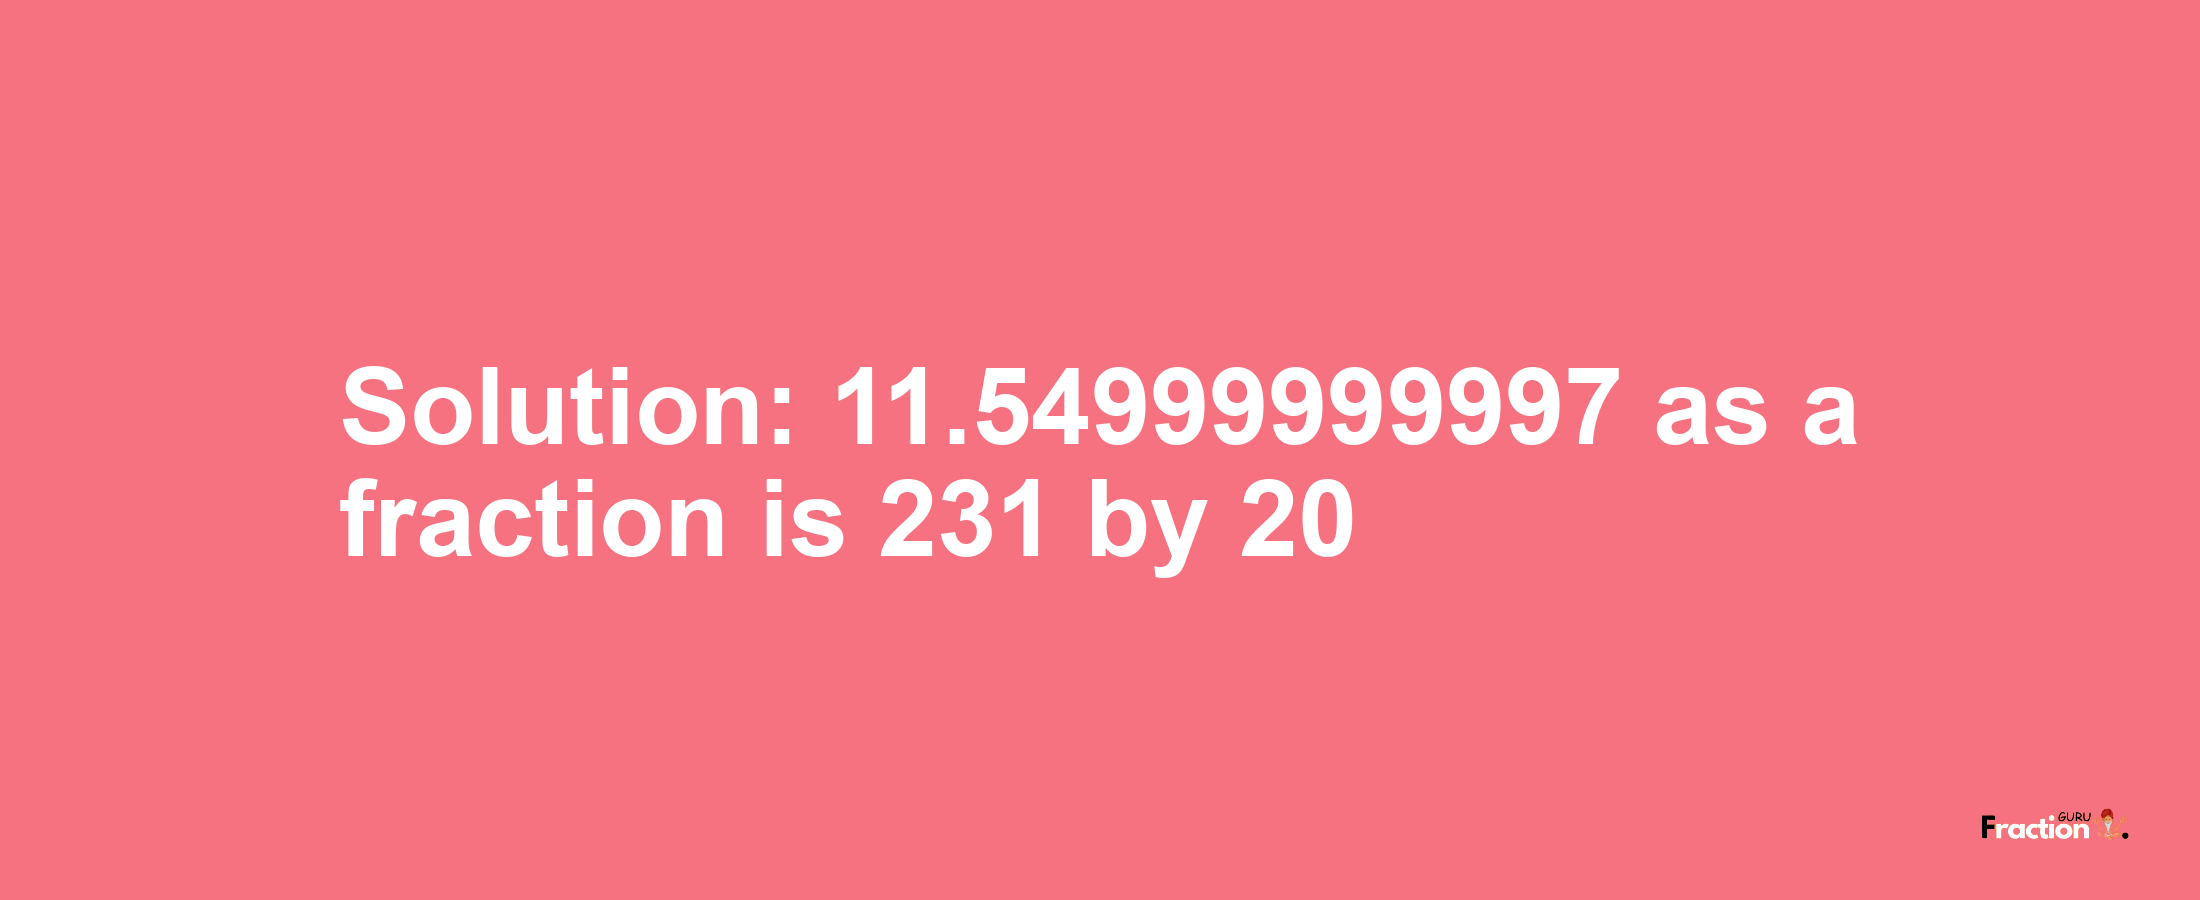 Solution:11.54999999997 as a fraction is 231/20